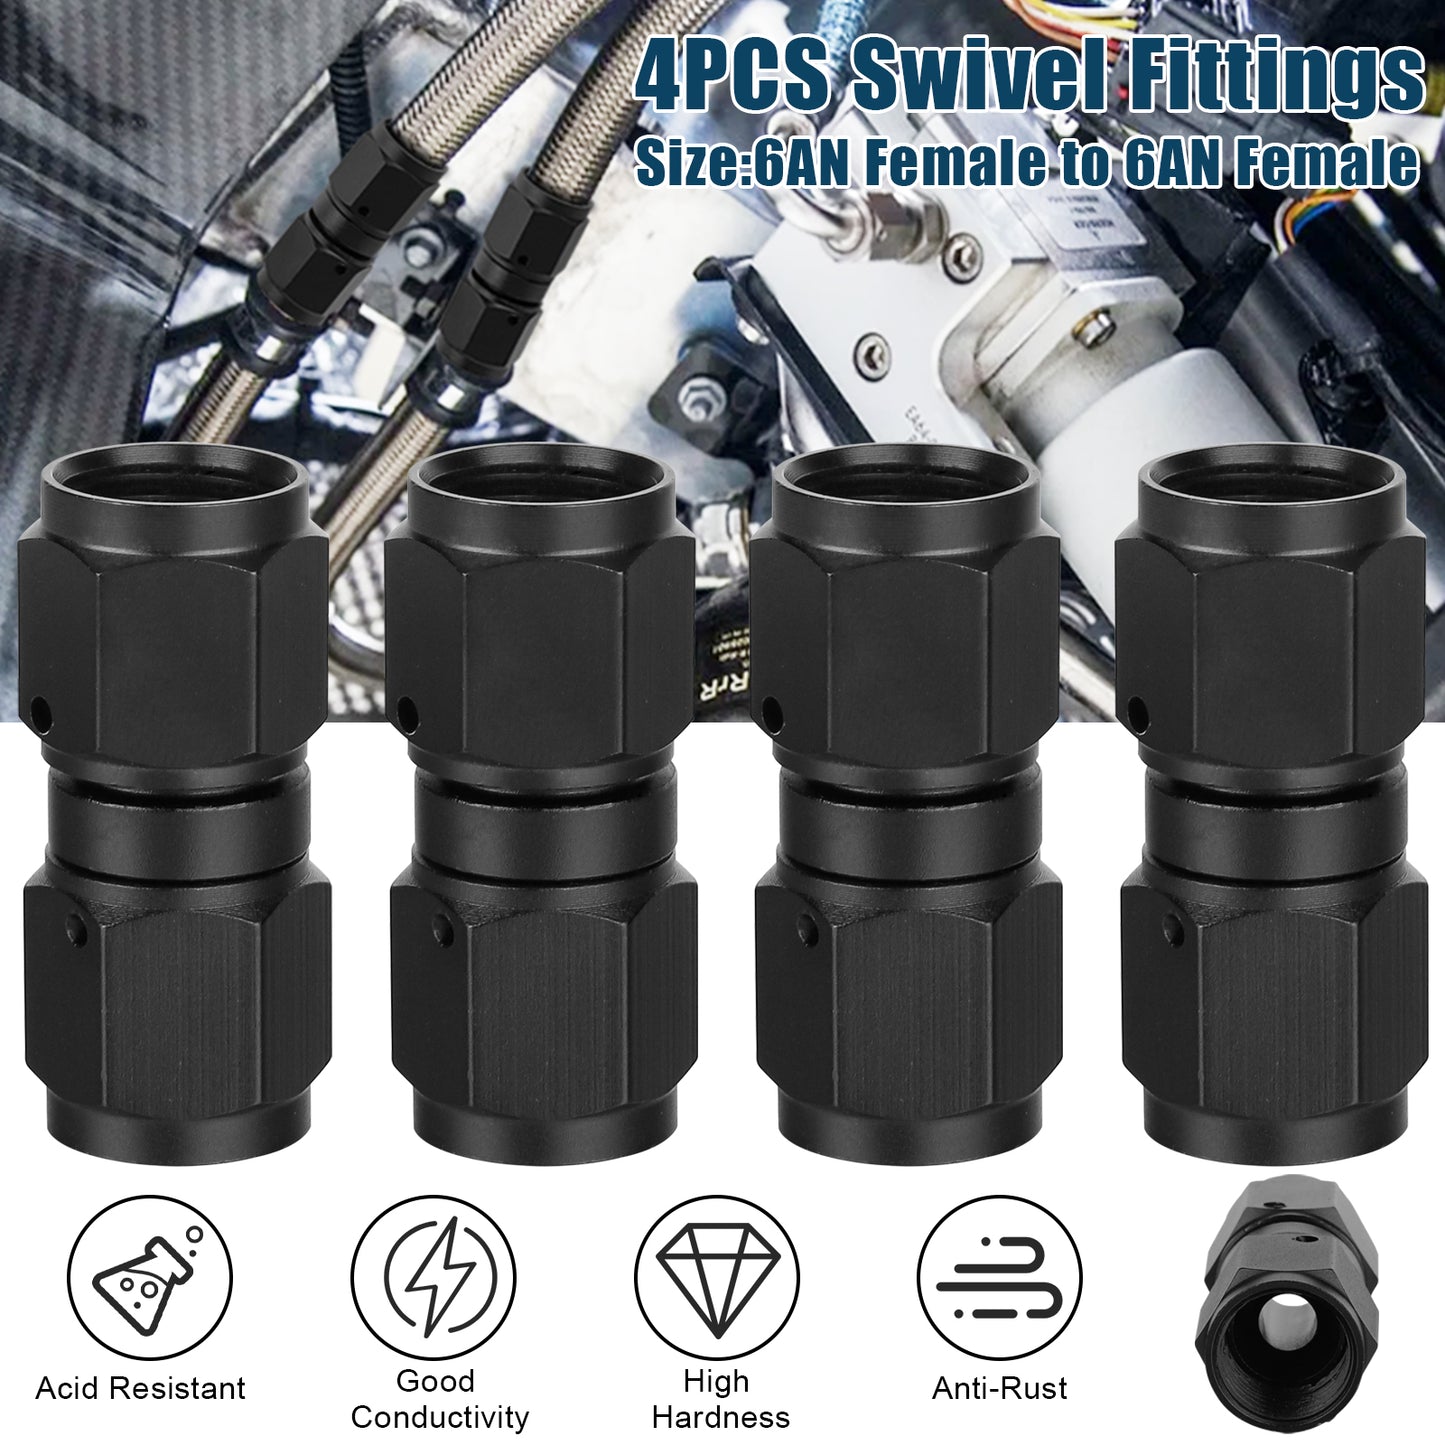 4PCS 6AN Female to 6AN Female Coupler Straight Swivel Fittings Connector